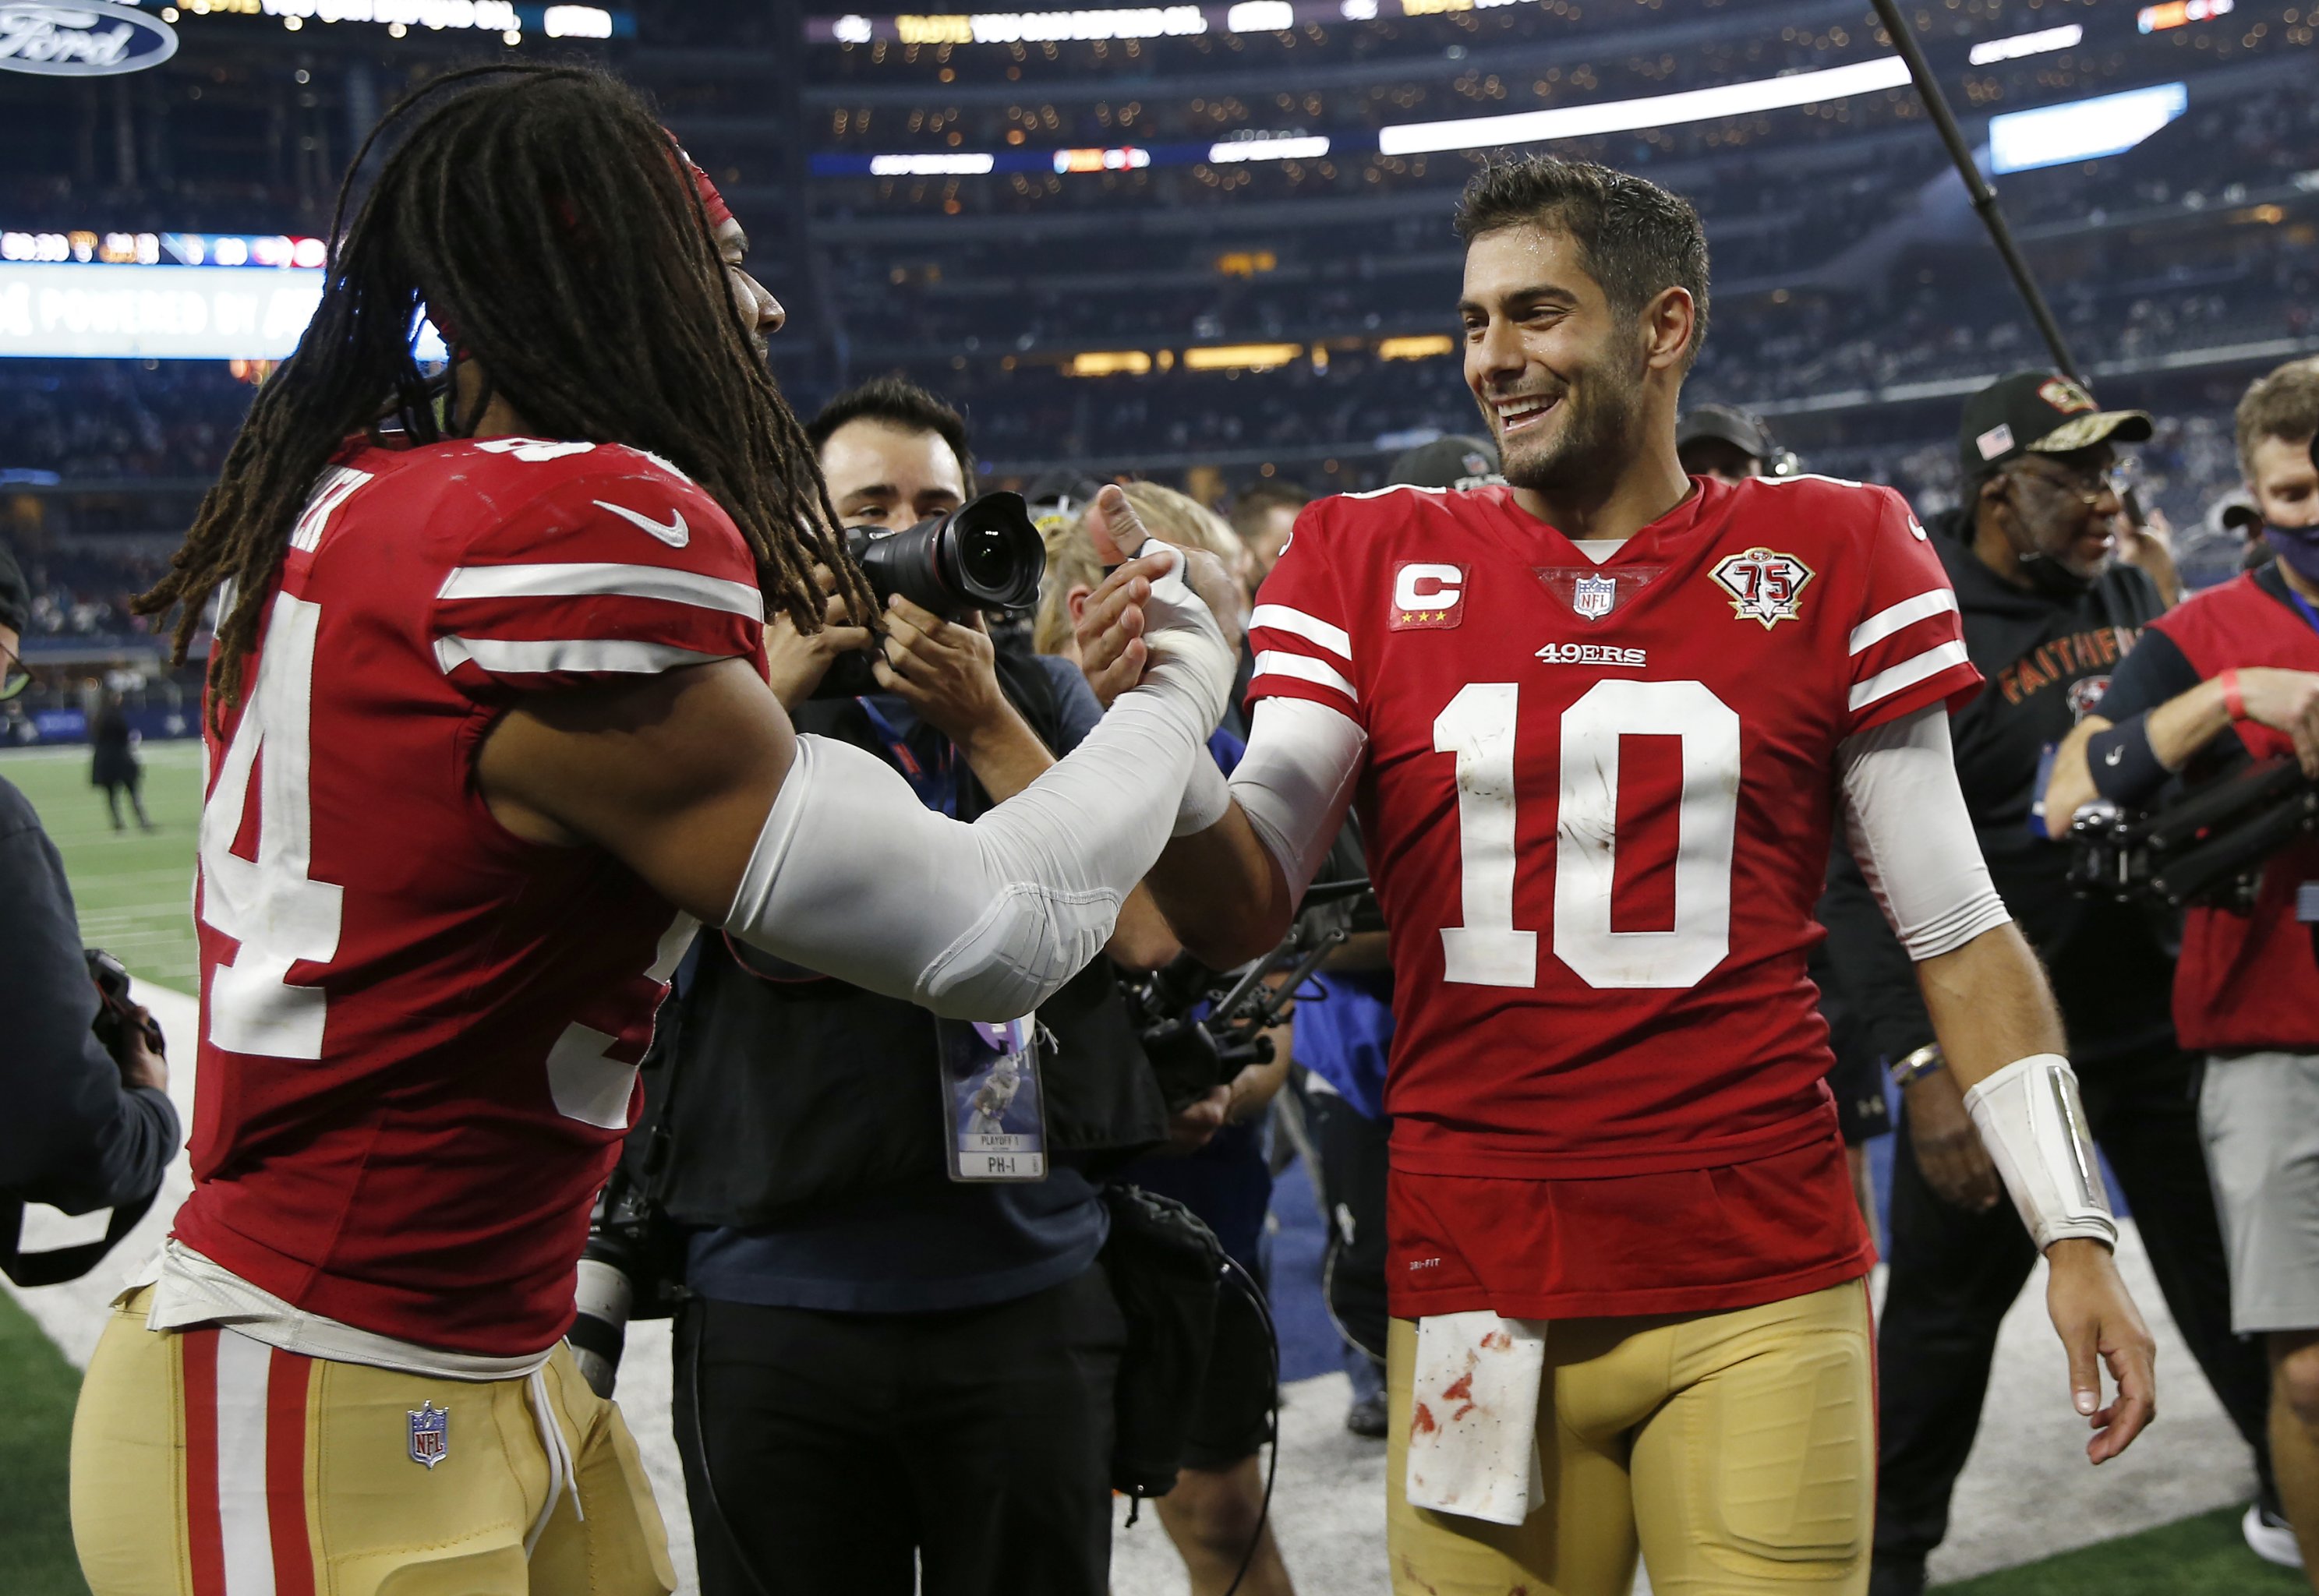 Jimmy Garoppolo Overheard Saying 'F--k the Packers' in Postgame